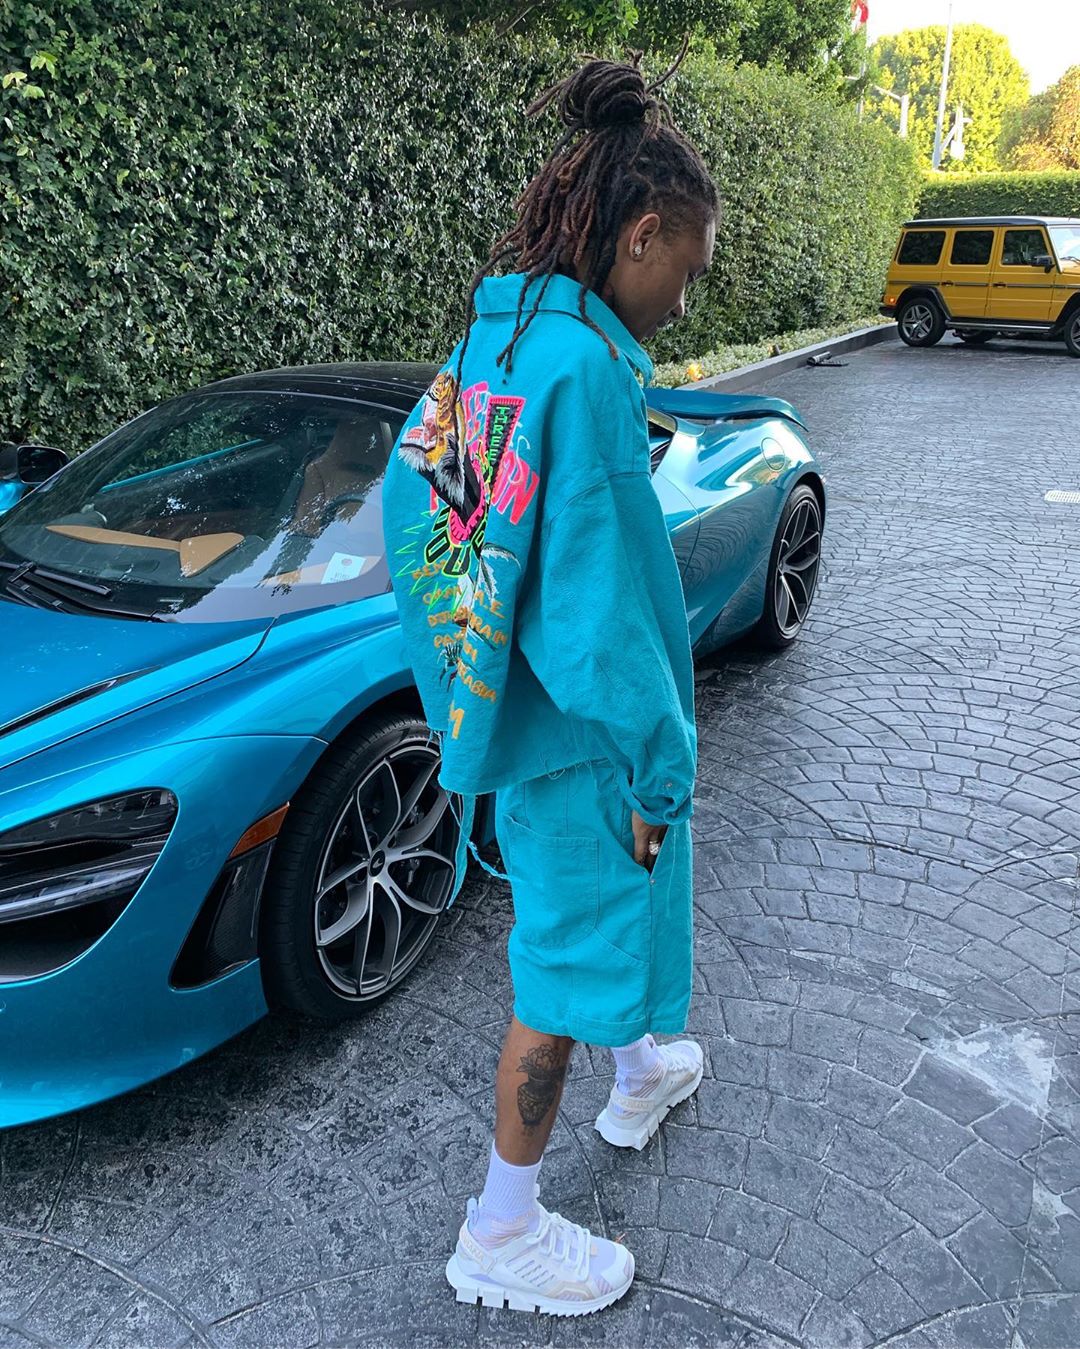 henvise Regnbue Skulptur SPOTTED: Swaelee Matches His McLaren In A Turquoise Ensemble – PAUSE Online  | Men's Fashion, Street Style, Fashion News & Streetwear